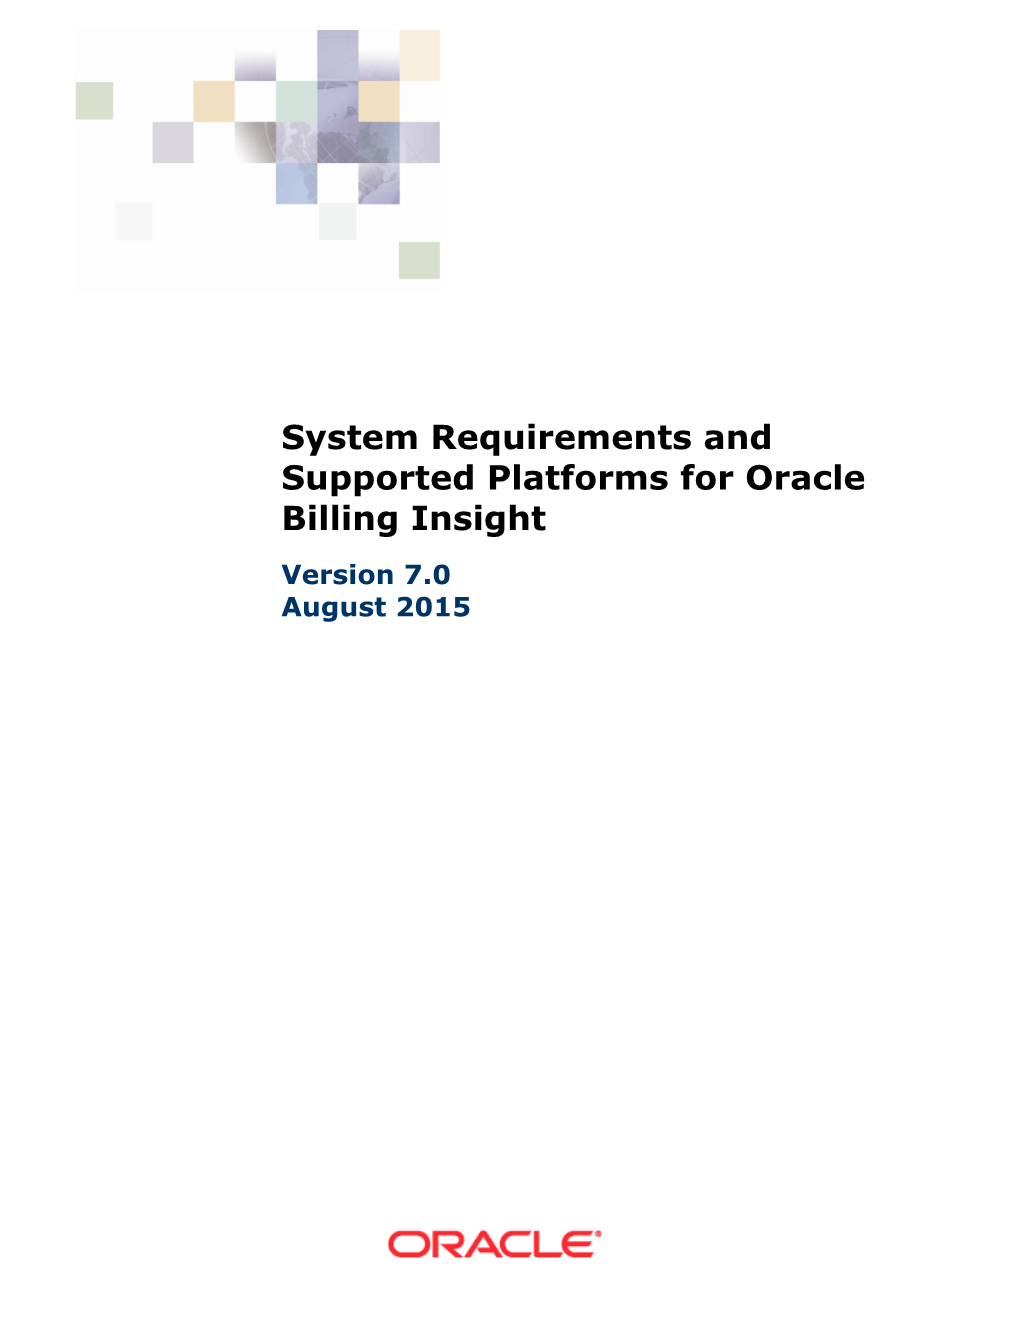 System Requirements and Supported Platforms for Oracle Billing Insight Version 7.0 August 2015